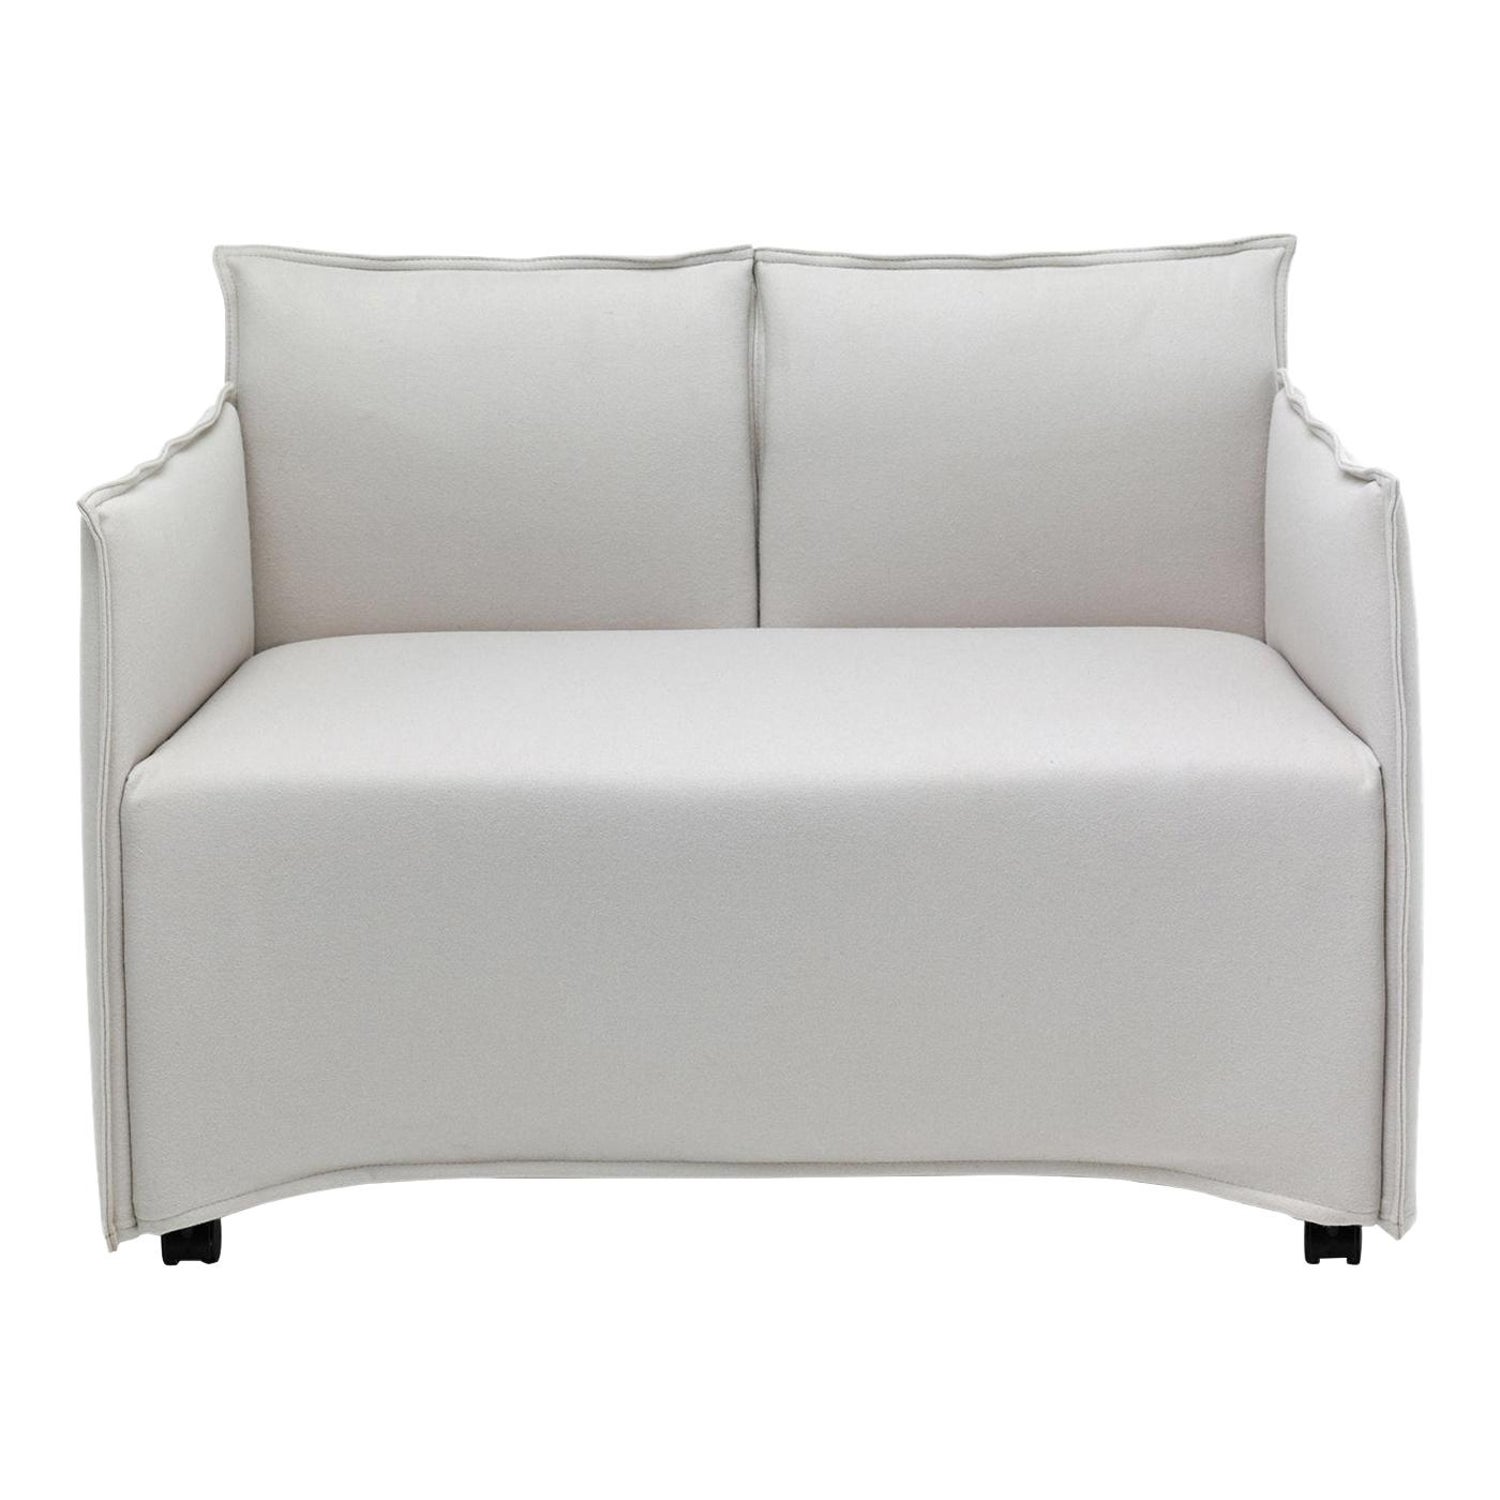 Medven Two-Seat Sofa For Sale at 1stDibs